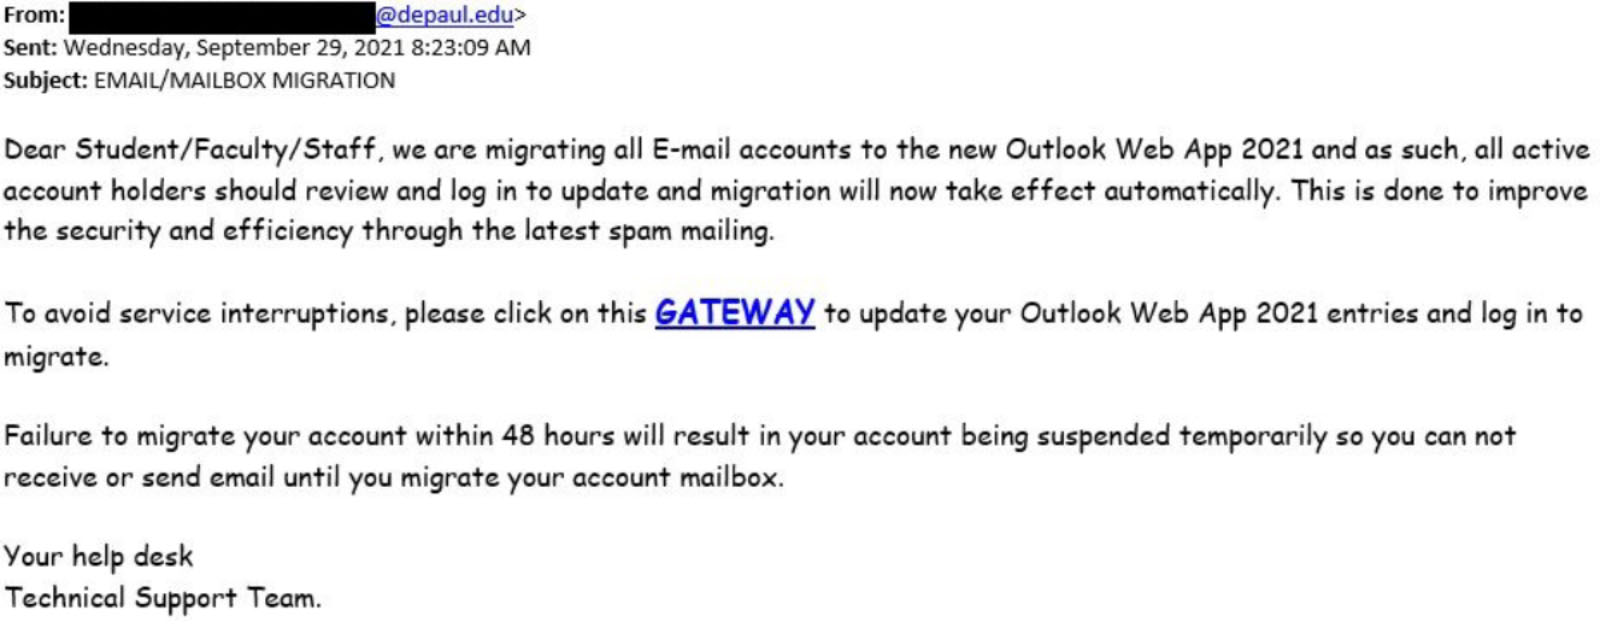 A screenshot of a malicious email. The malicious email attempts to convince victims into clicking a malicious link.